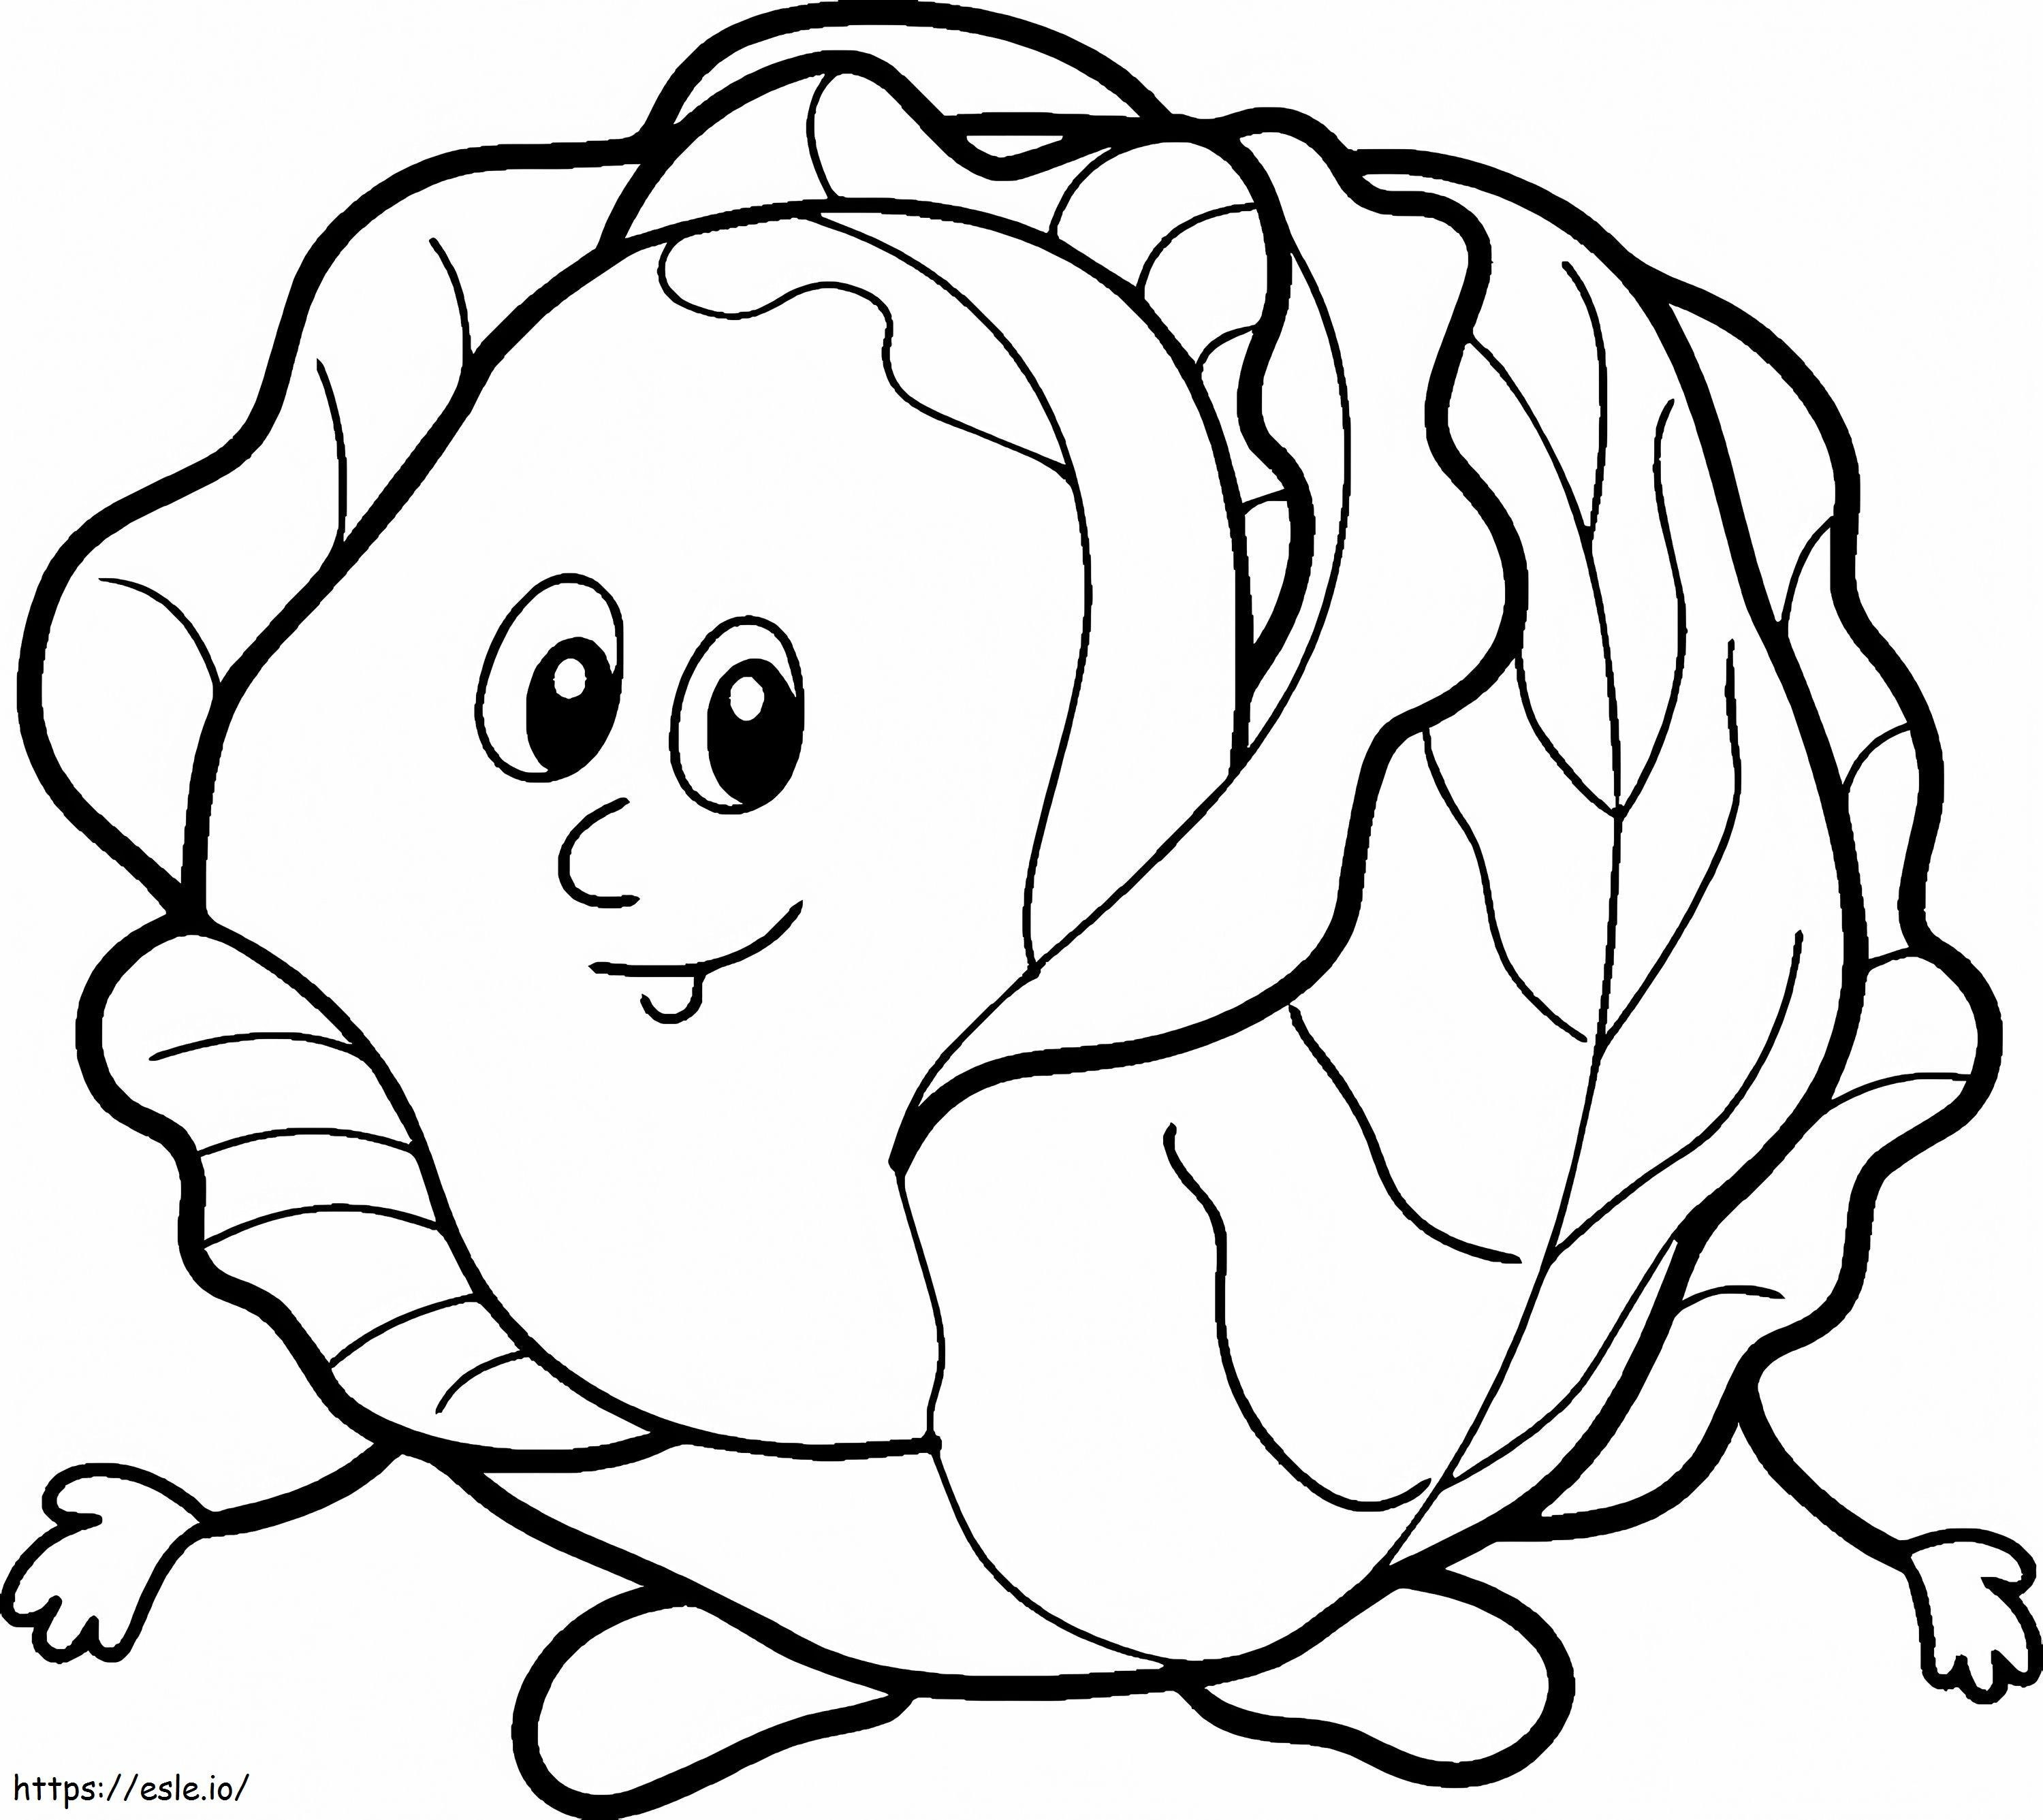 Vegetable 37 coloring page